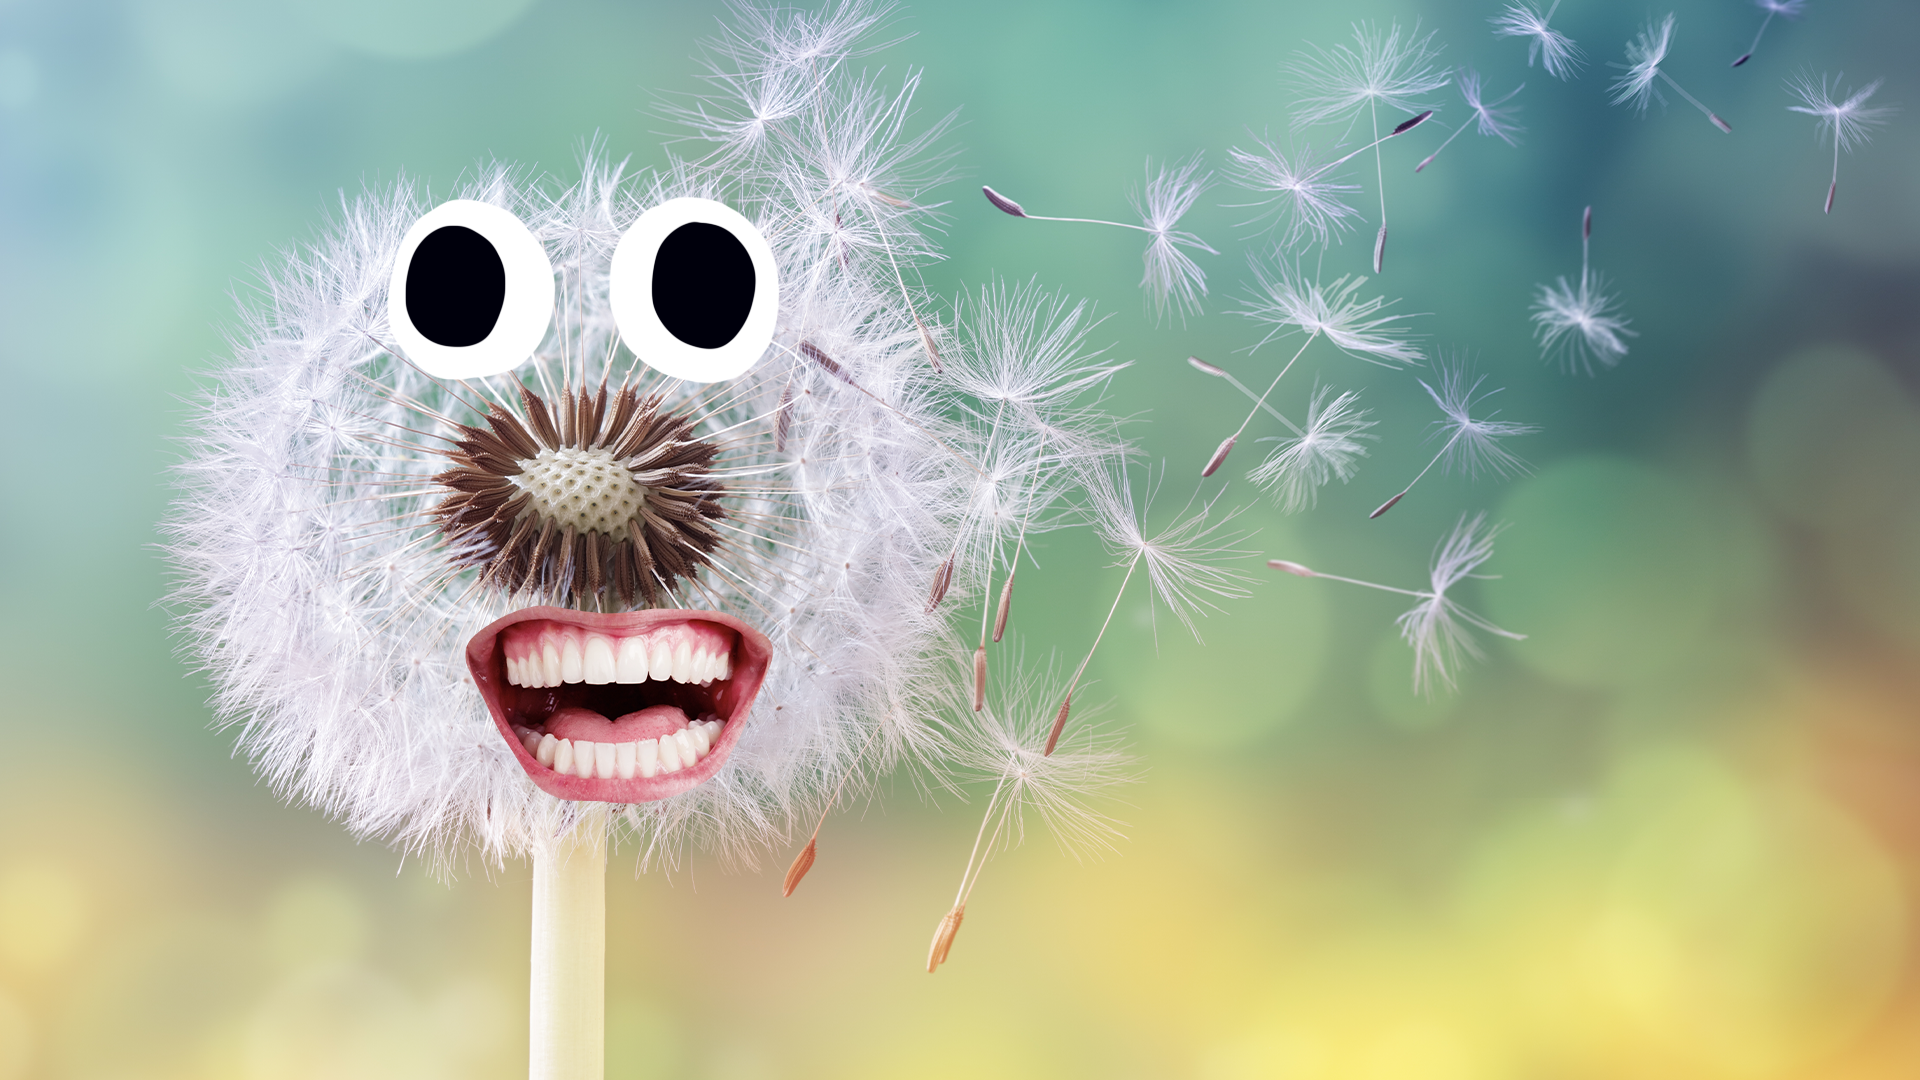 Dandelion with goofy face